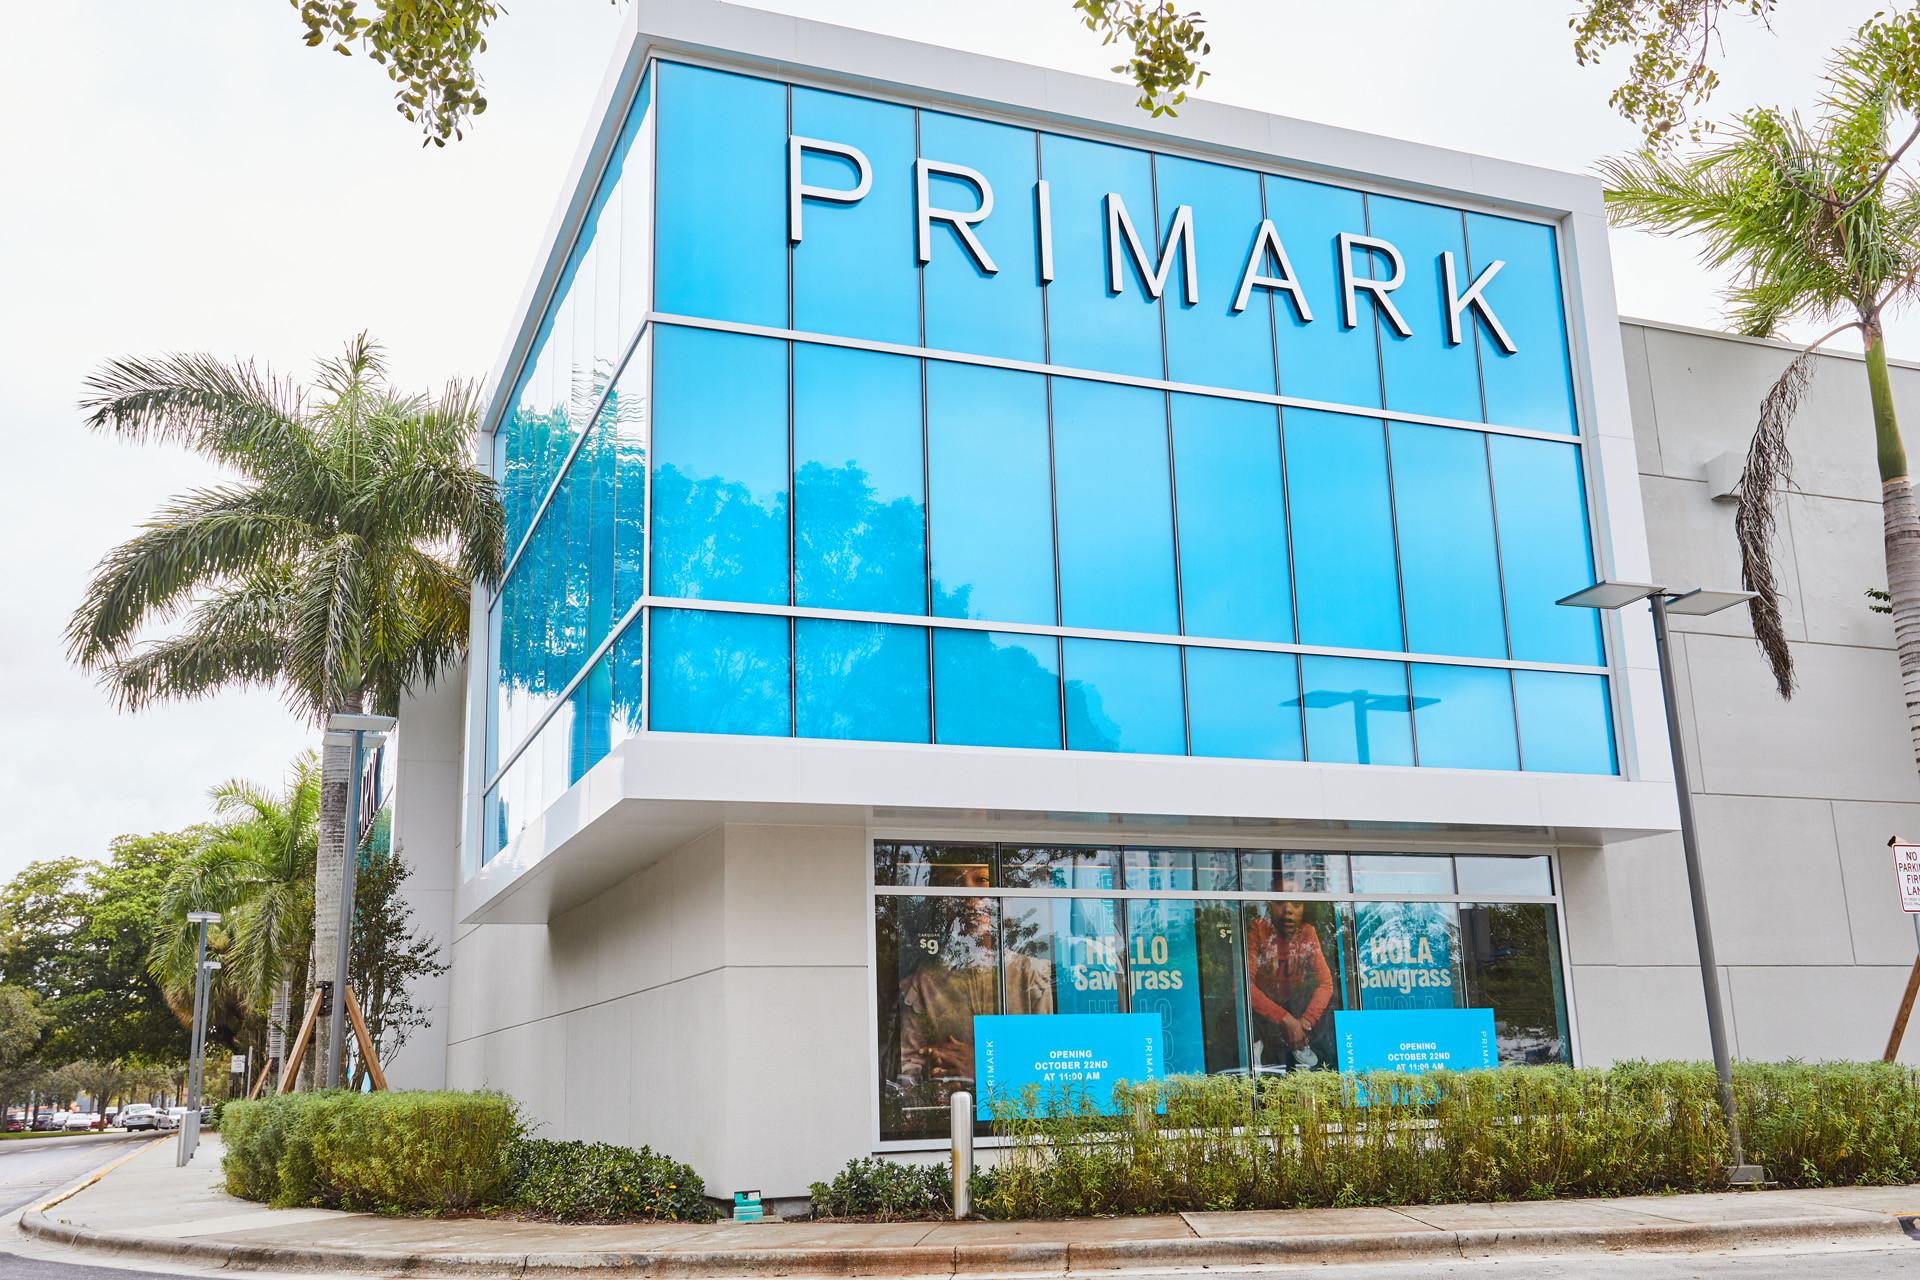 Primark plans £140 million retail investment over the next two